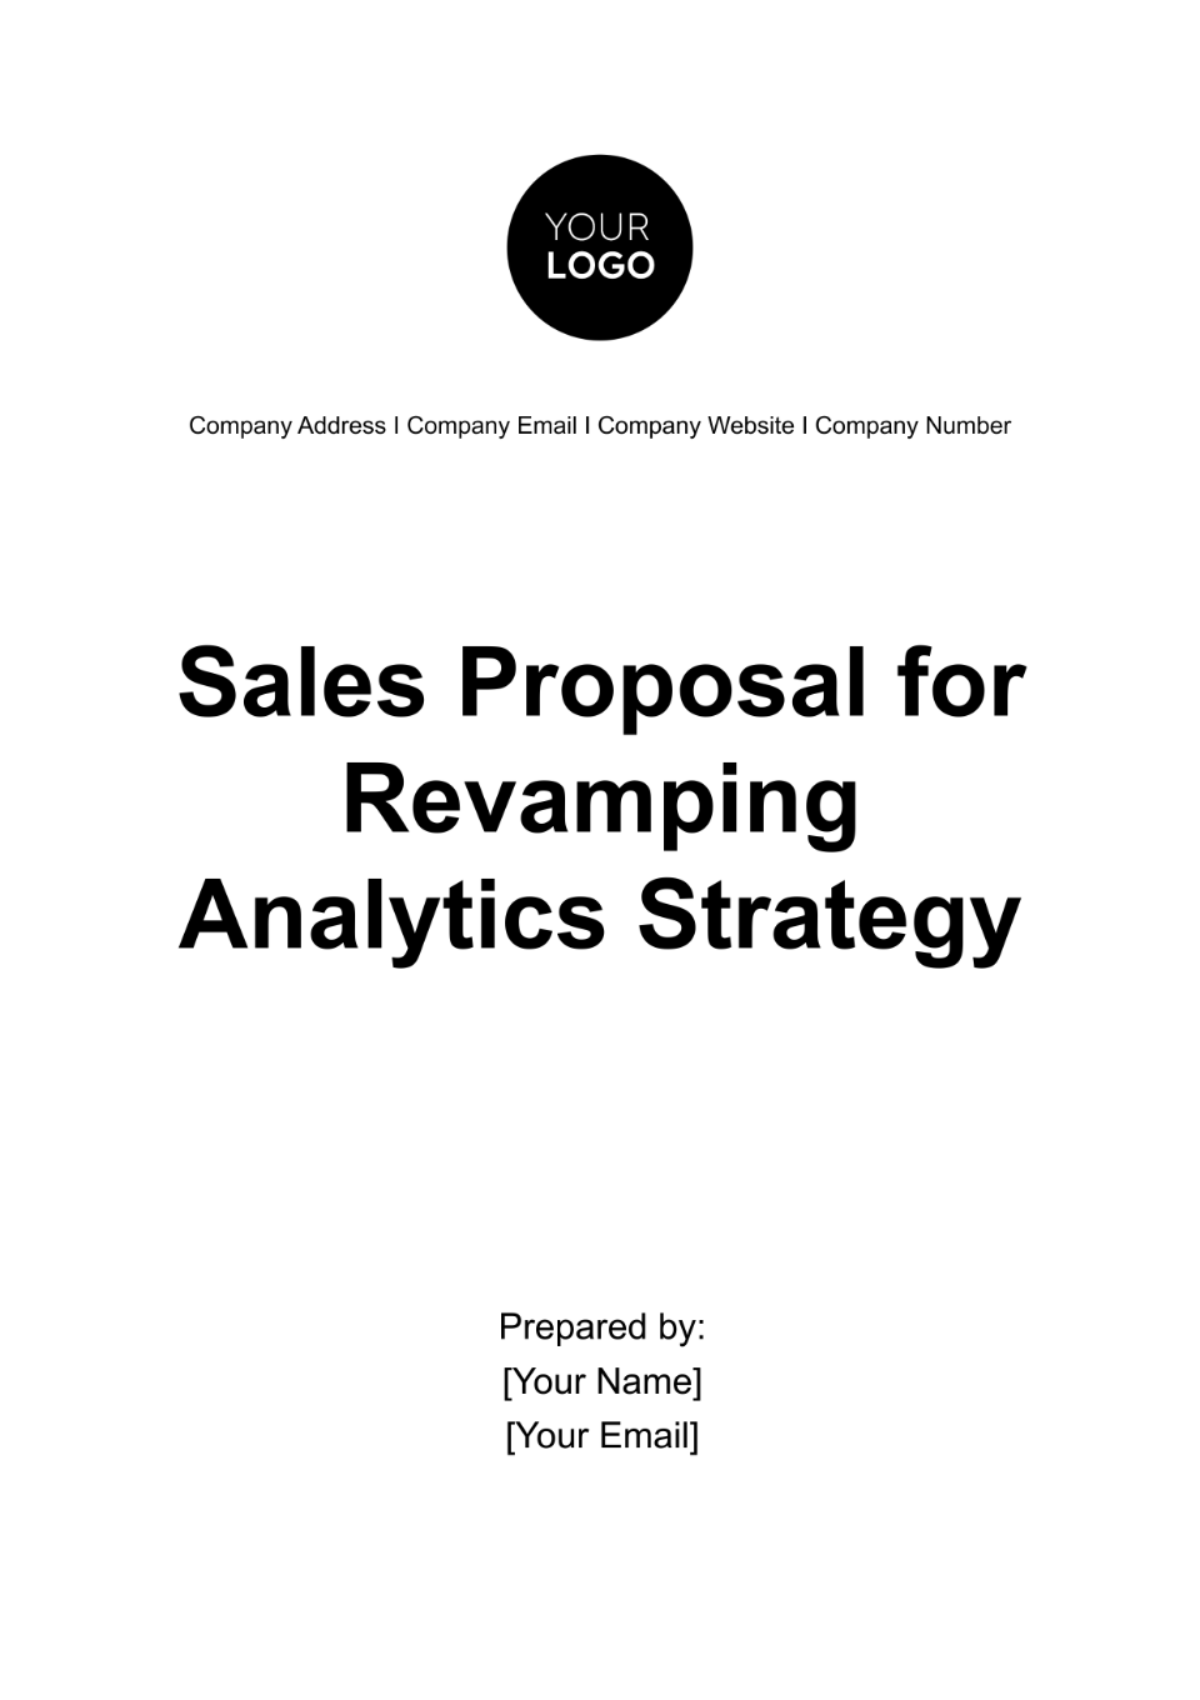 Sales Proposal for Revamping Analytics Strategy Template